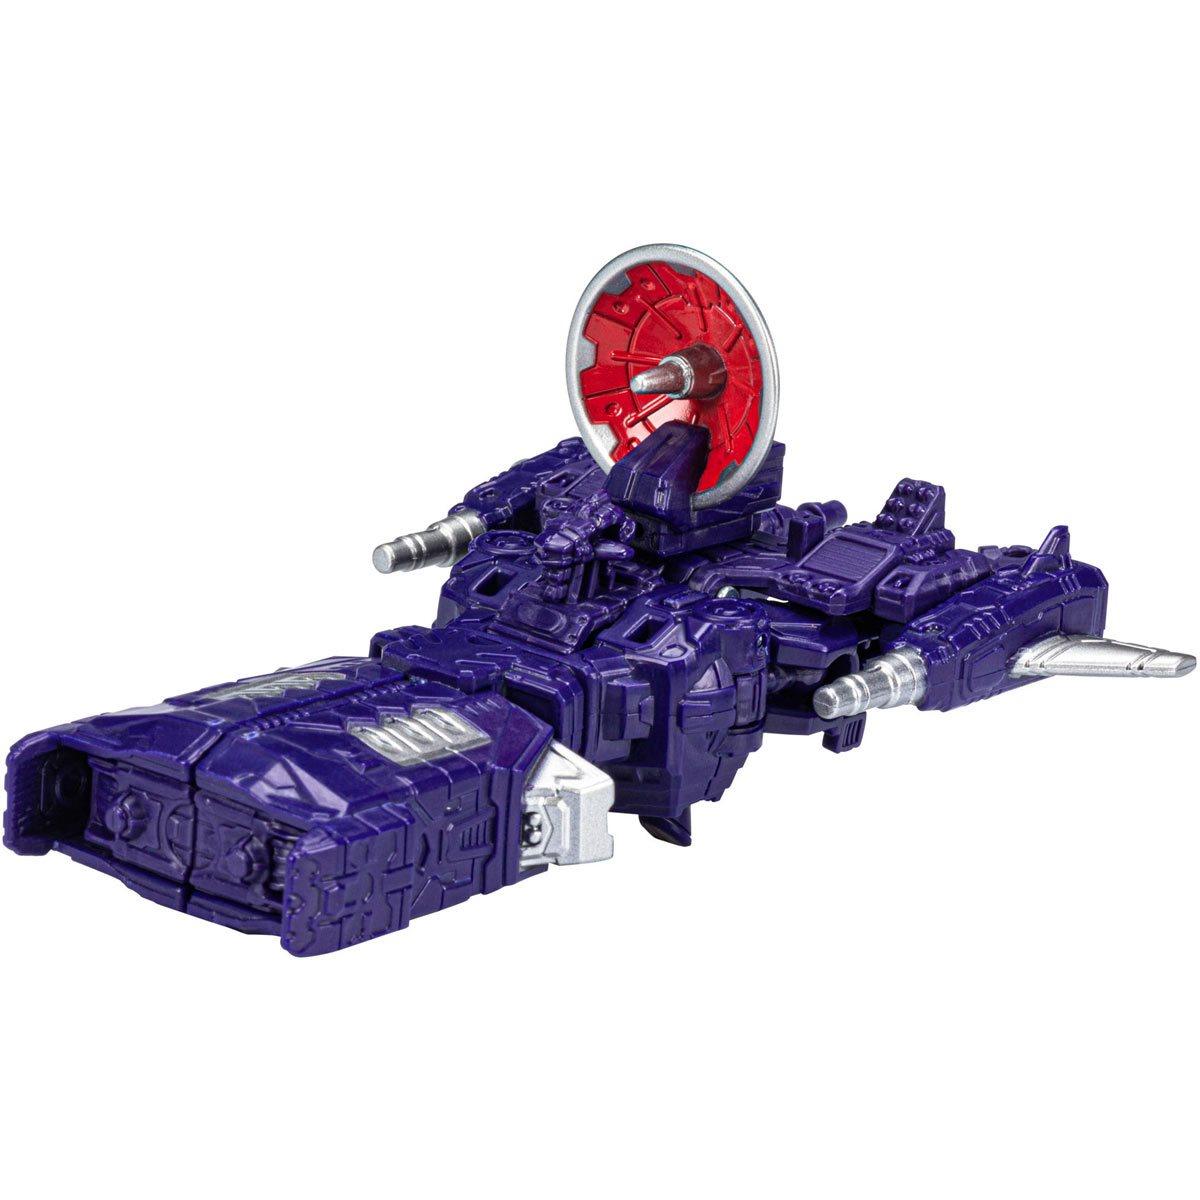 Transformers Toys Generations Legacy Core - Shockwave - BumbleToys - 5-7 Years, Boys, Figures, Pre-Order, Transformers